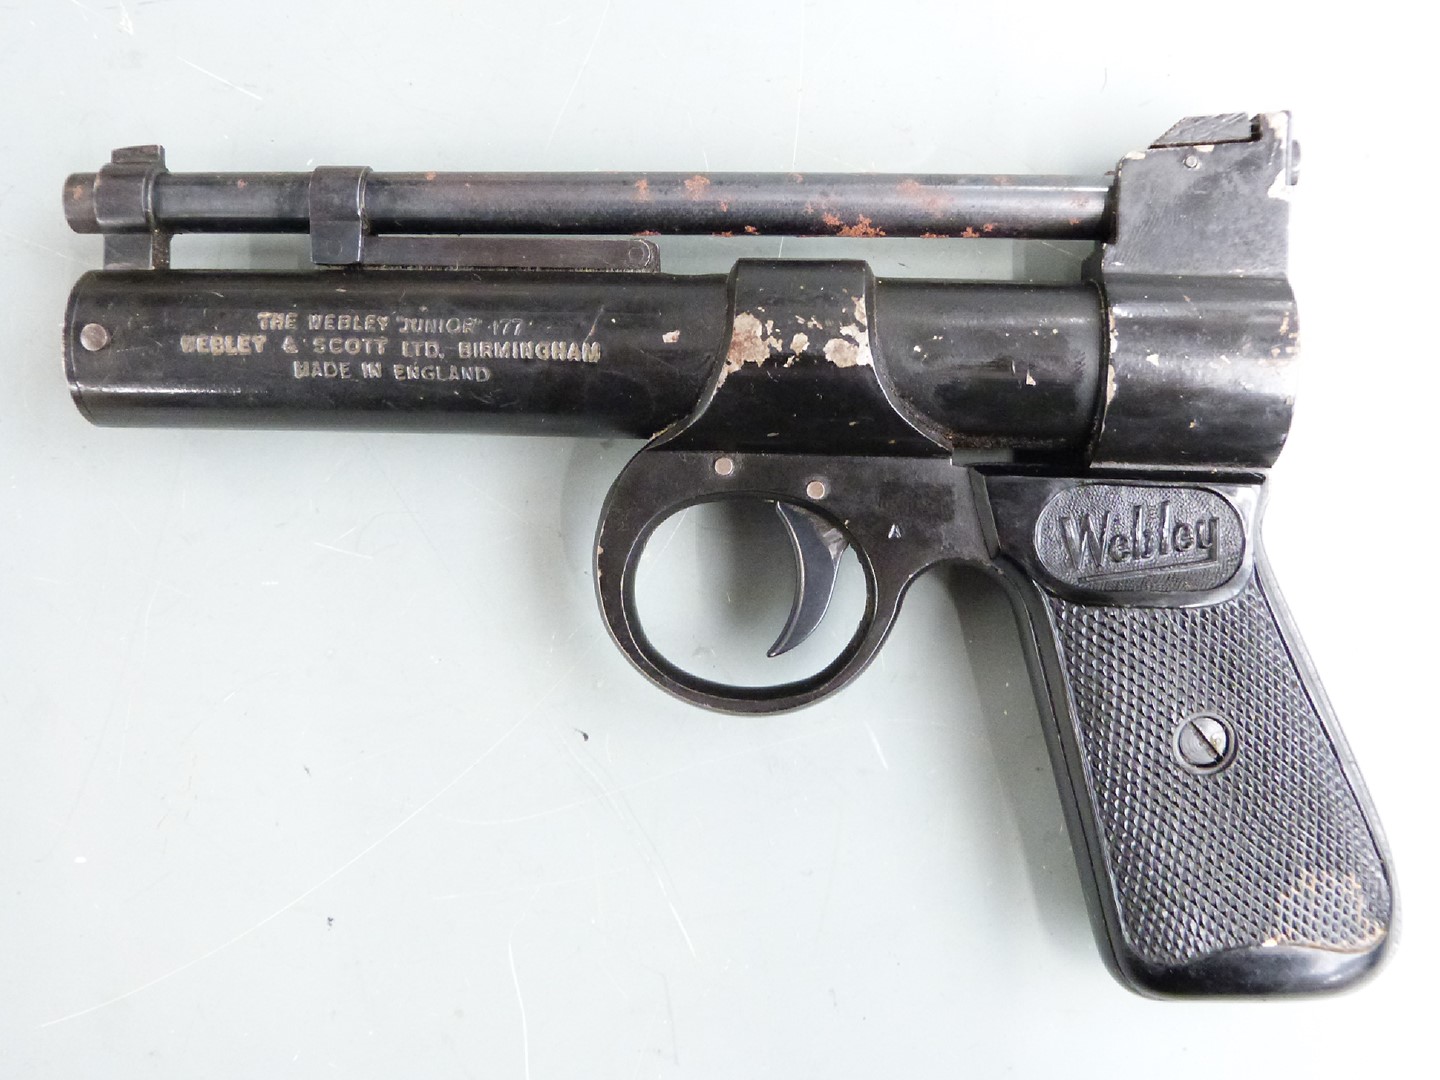 Webley Junior .177 air pistol with named and chequered grips, serial number 248, in original box. - Image 3 of 5